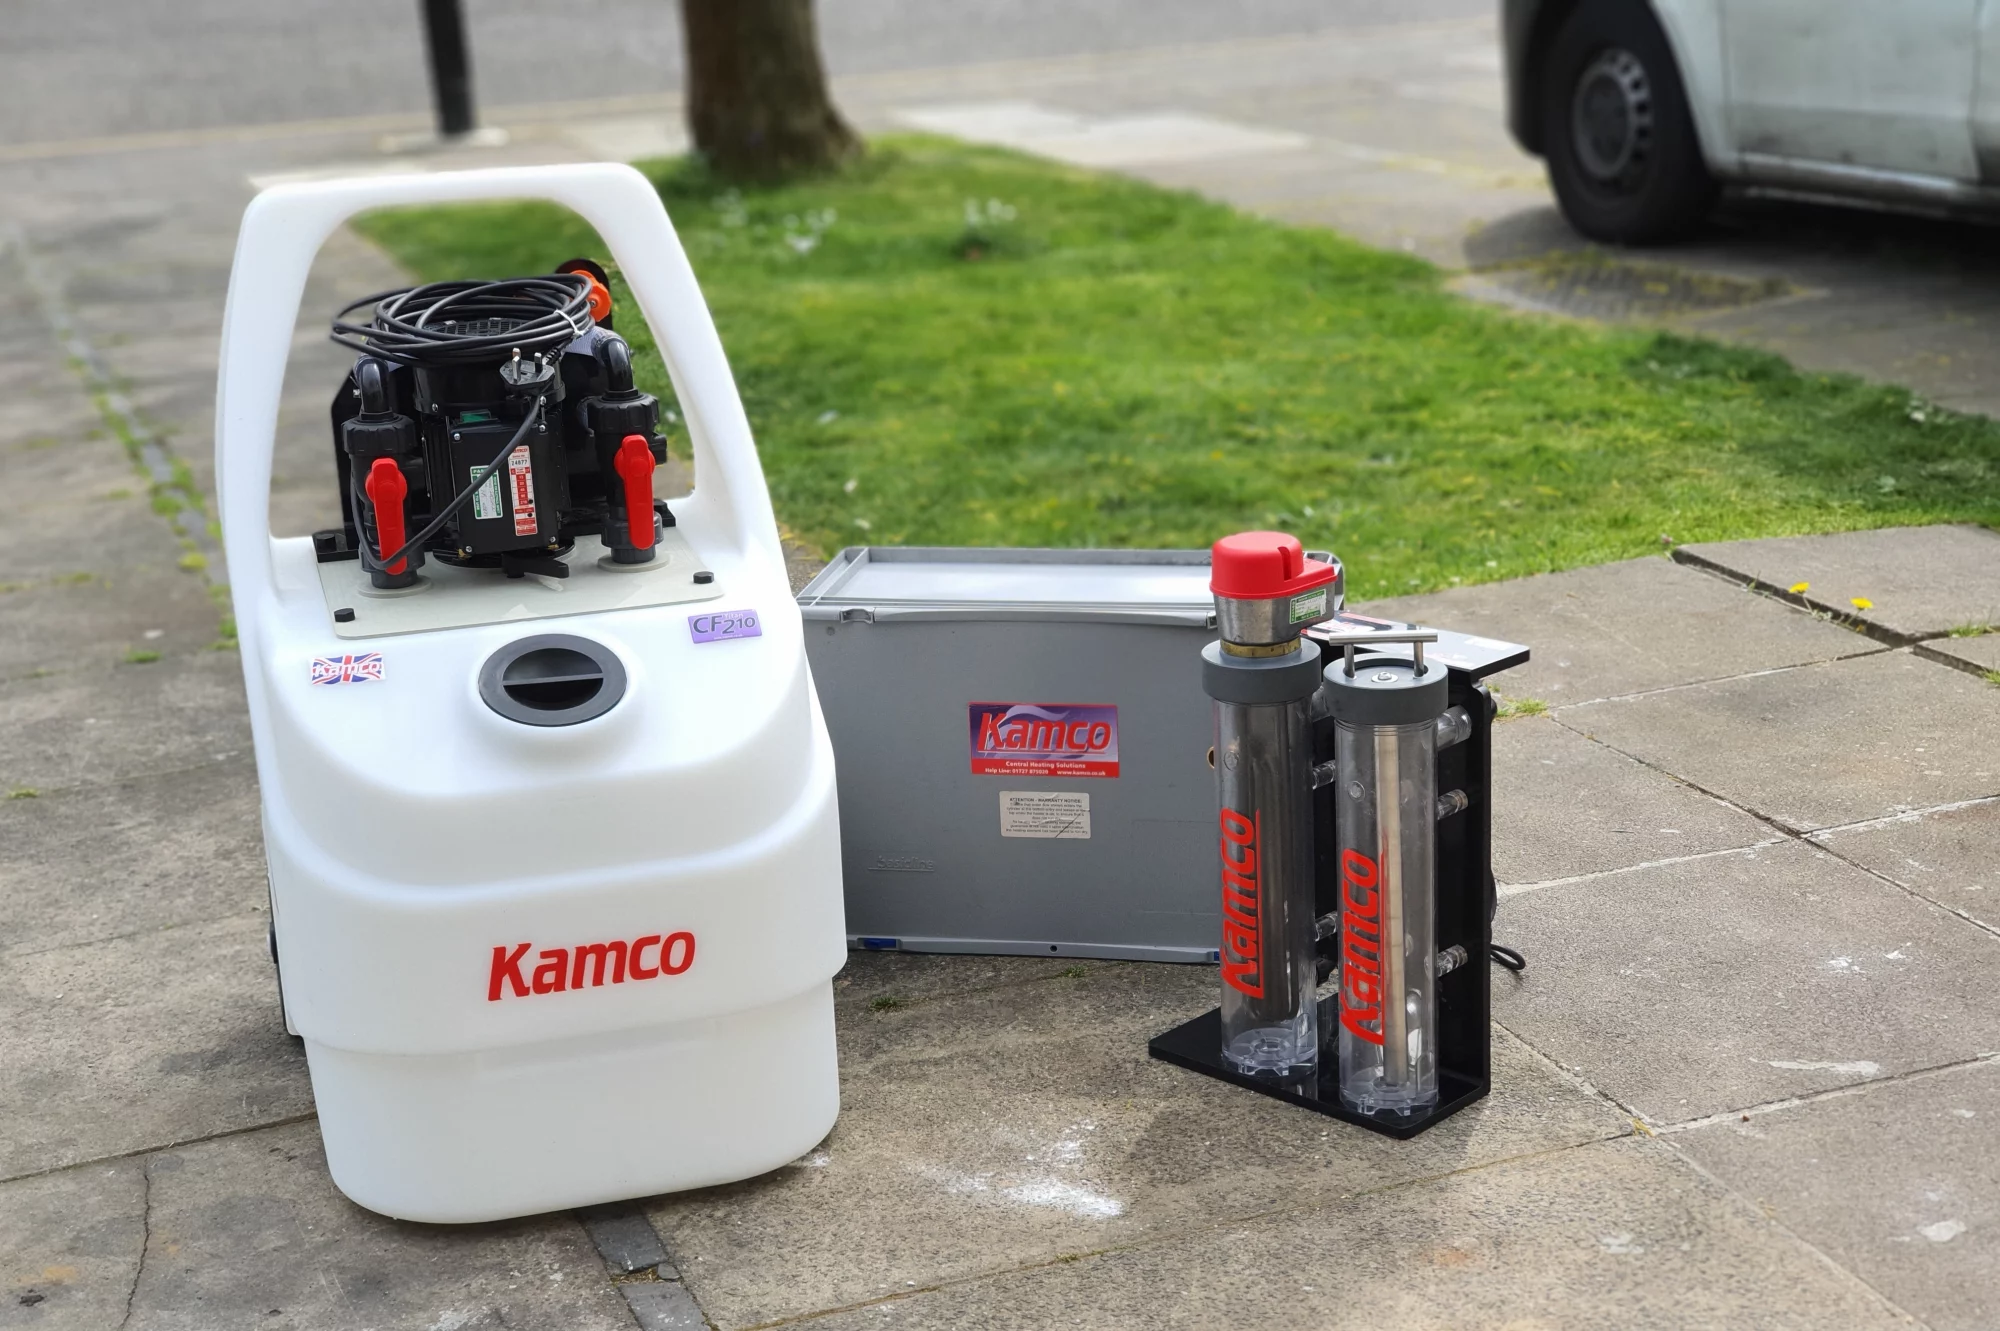 CF210 powerflush machine set up on an outdoor driveway, ready for a heating system powerflush service.